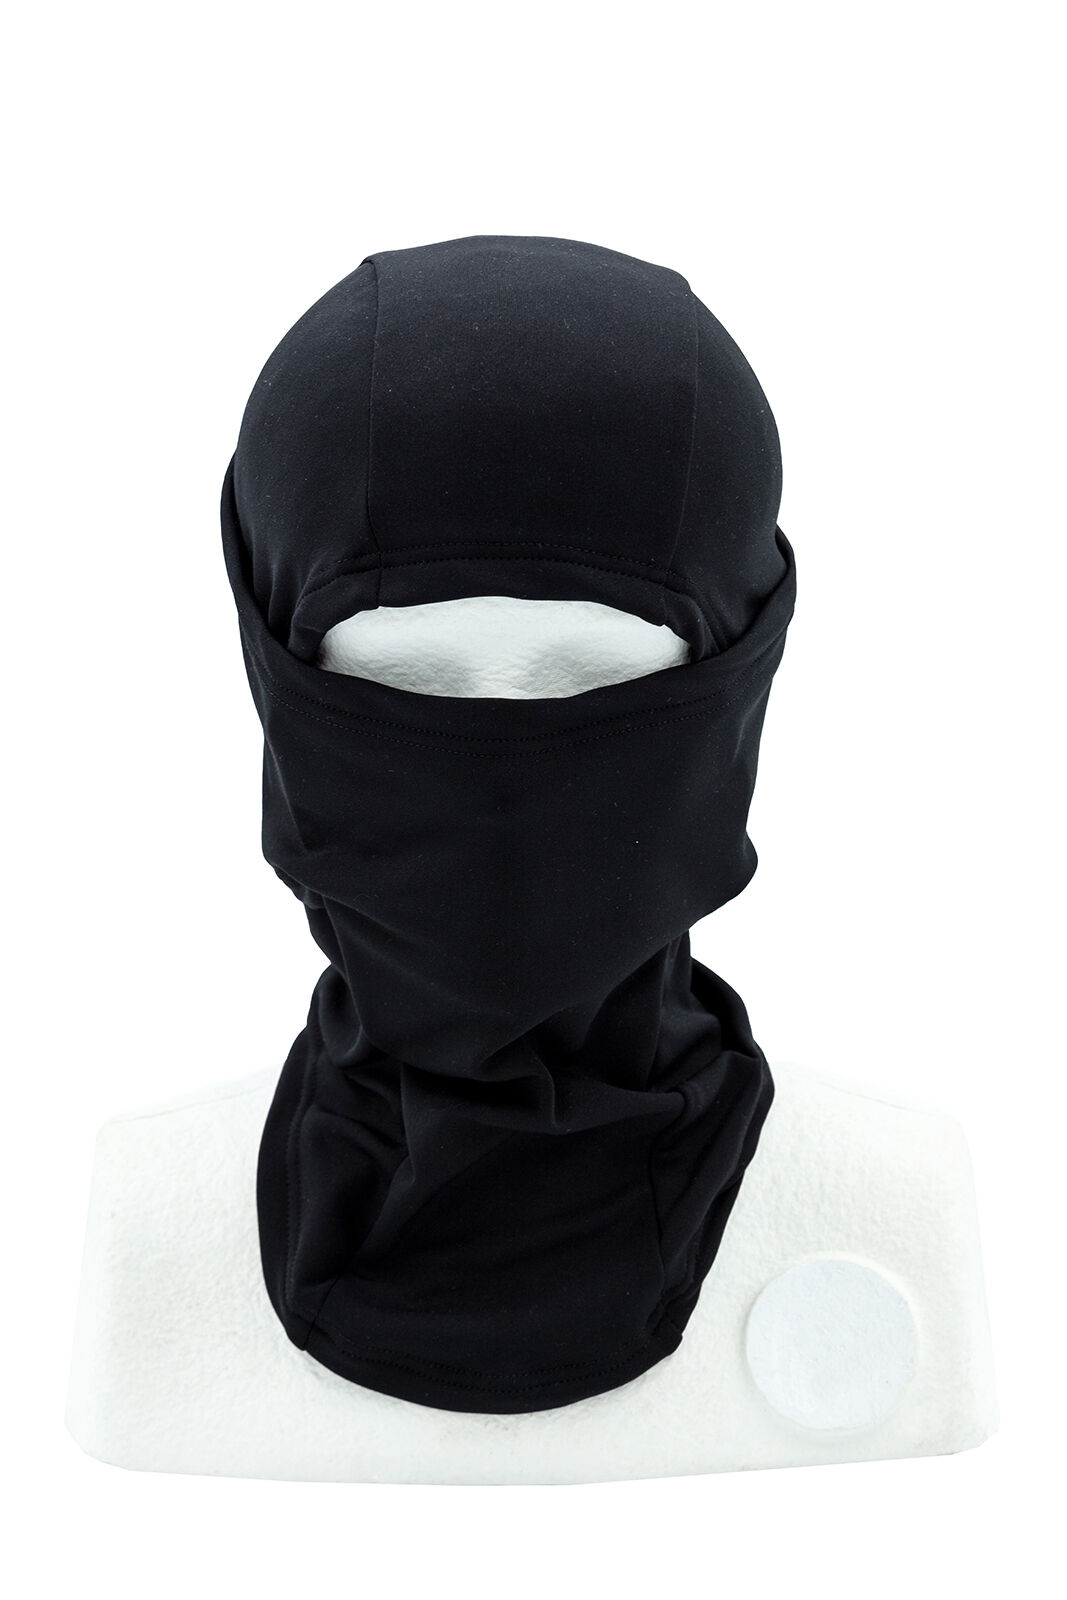 PAG Neckwear Balaclava Fit Micro WR - Stormhætte